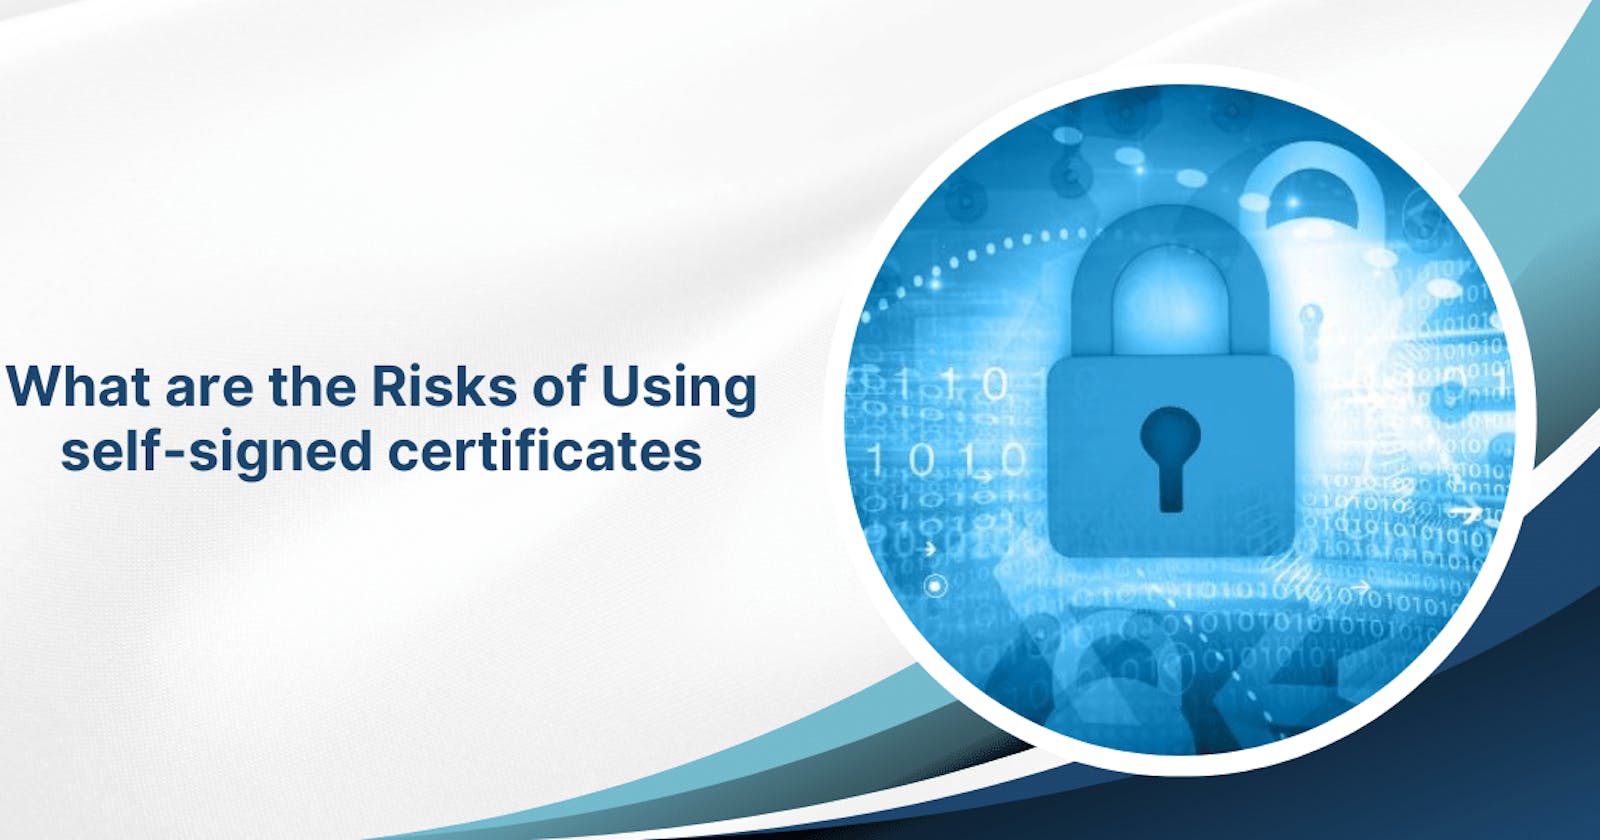 What are the Risks of Using self-signed certificates